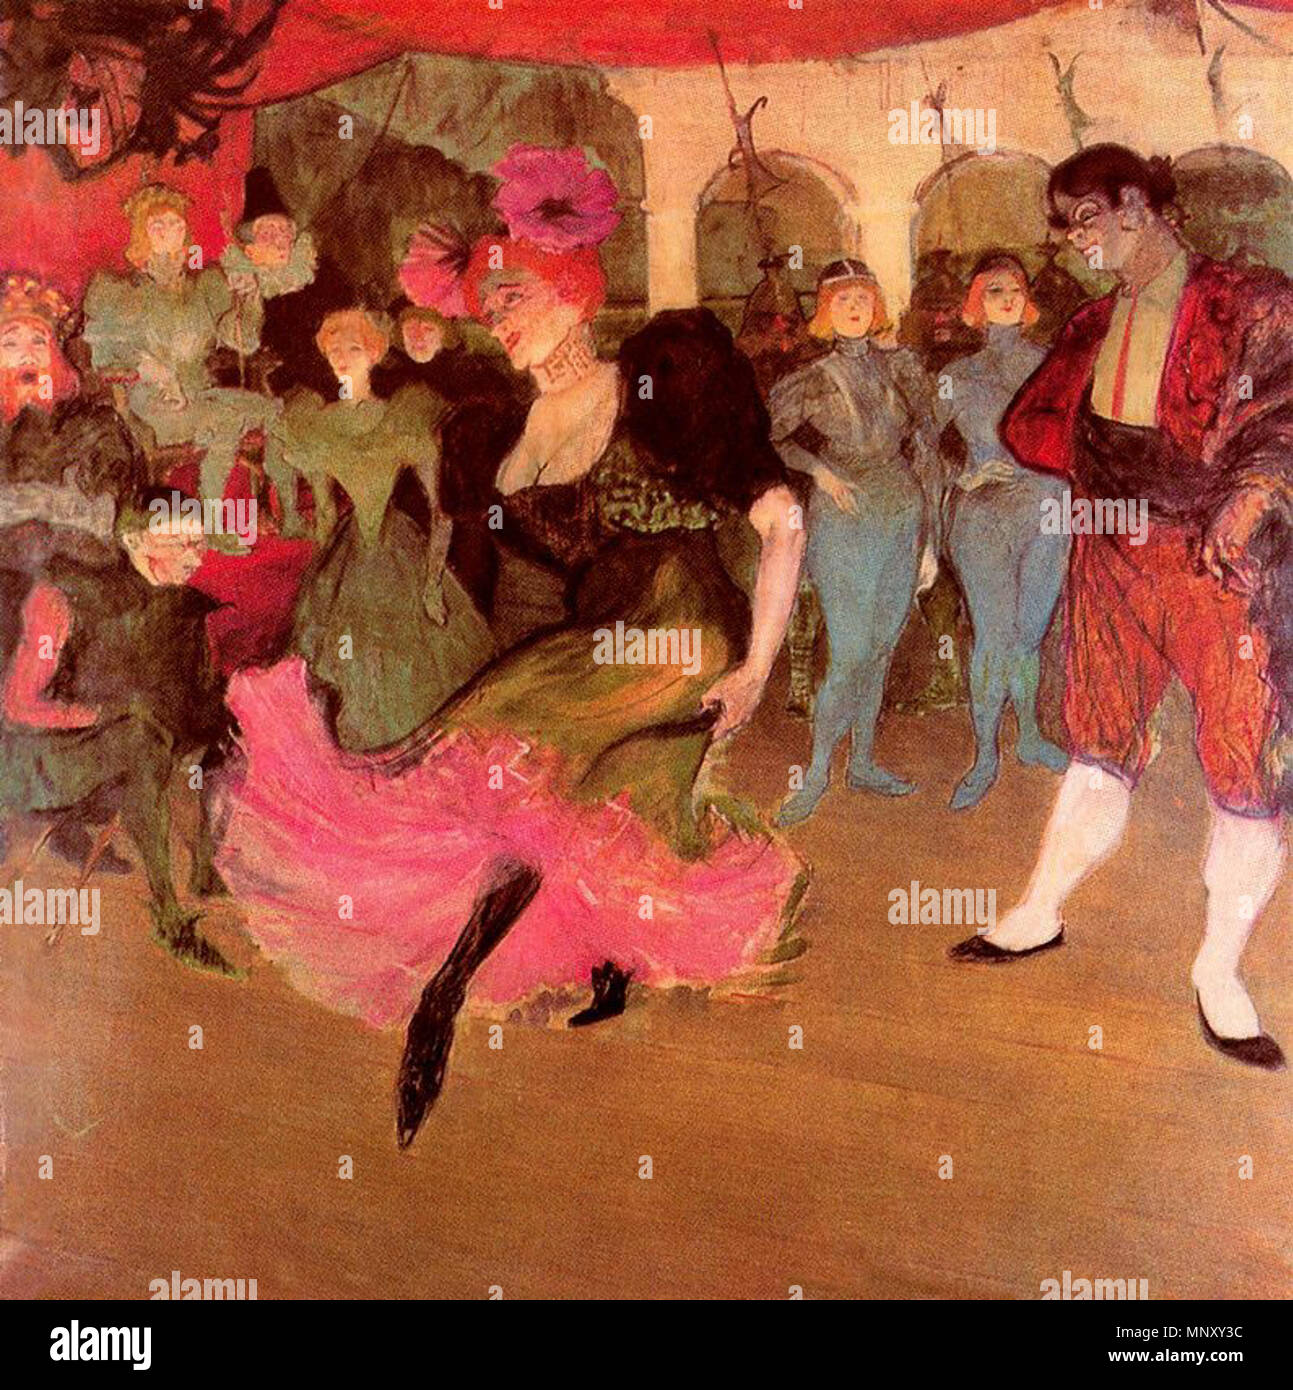 . English: Painting by Toulouse-Lautrec . 18 March 2014, 13:42:47.   Henri de Toulouse-Lautrec  (1864–1901)      Alternative names Henri Marie Raymond de Toulouse-Lautrec-Monfa  Description French poster artist, lithographer, painter, artist and graphic artist  Date of birth/death 24 November 1864 9 September 1901  Location of birth/death Albi Château Malromé [Malromé castle] (Gironde)  Work period 1880--1901  Work location Paris, Bordeaux (in winter 1900).  Authority control  : Q82445 VIAF: 32003649 ISNI: 0000 0001 2126 6391 ULAN: 500029114 LCCN: n79045509 NLA: 36523107 WorldCat 1201 Toulouse Stock Photo